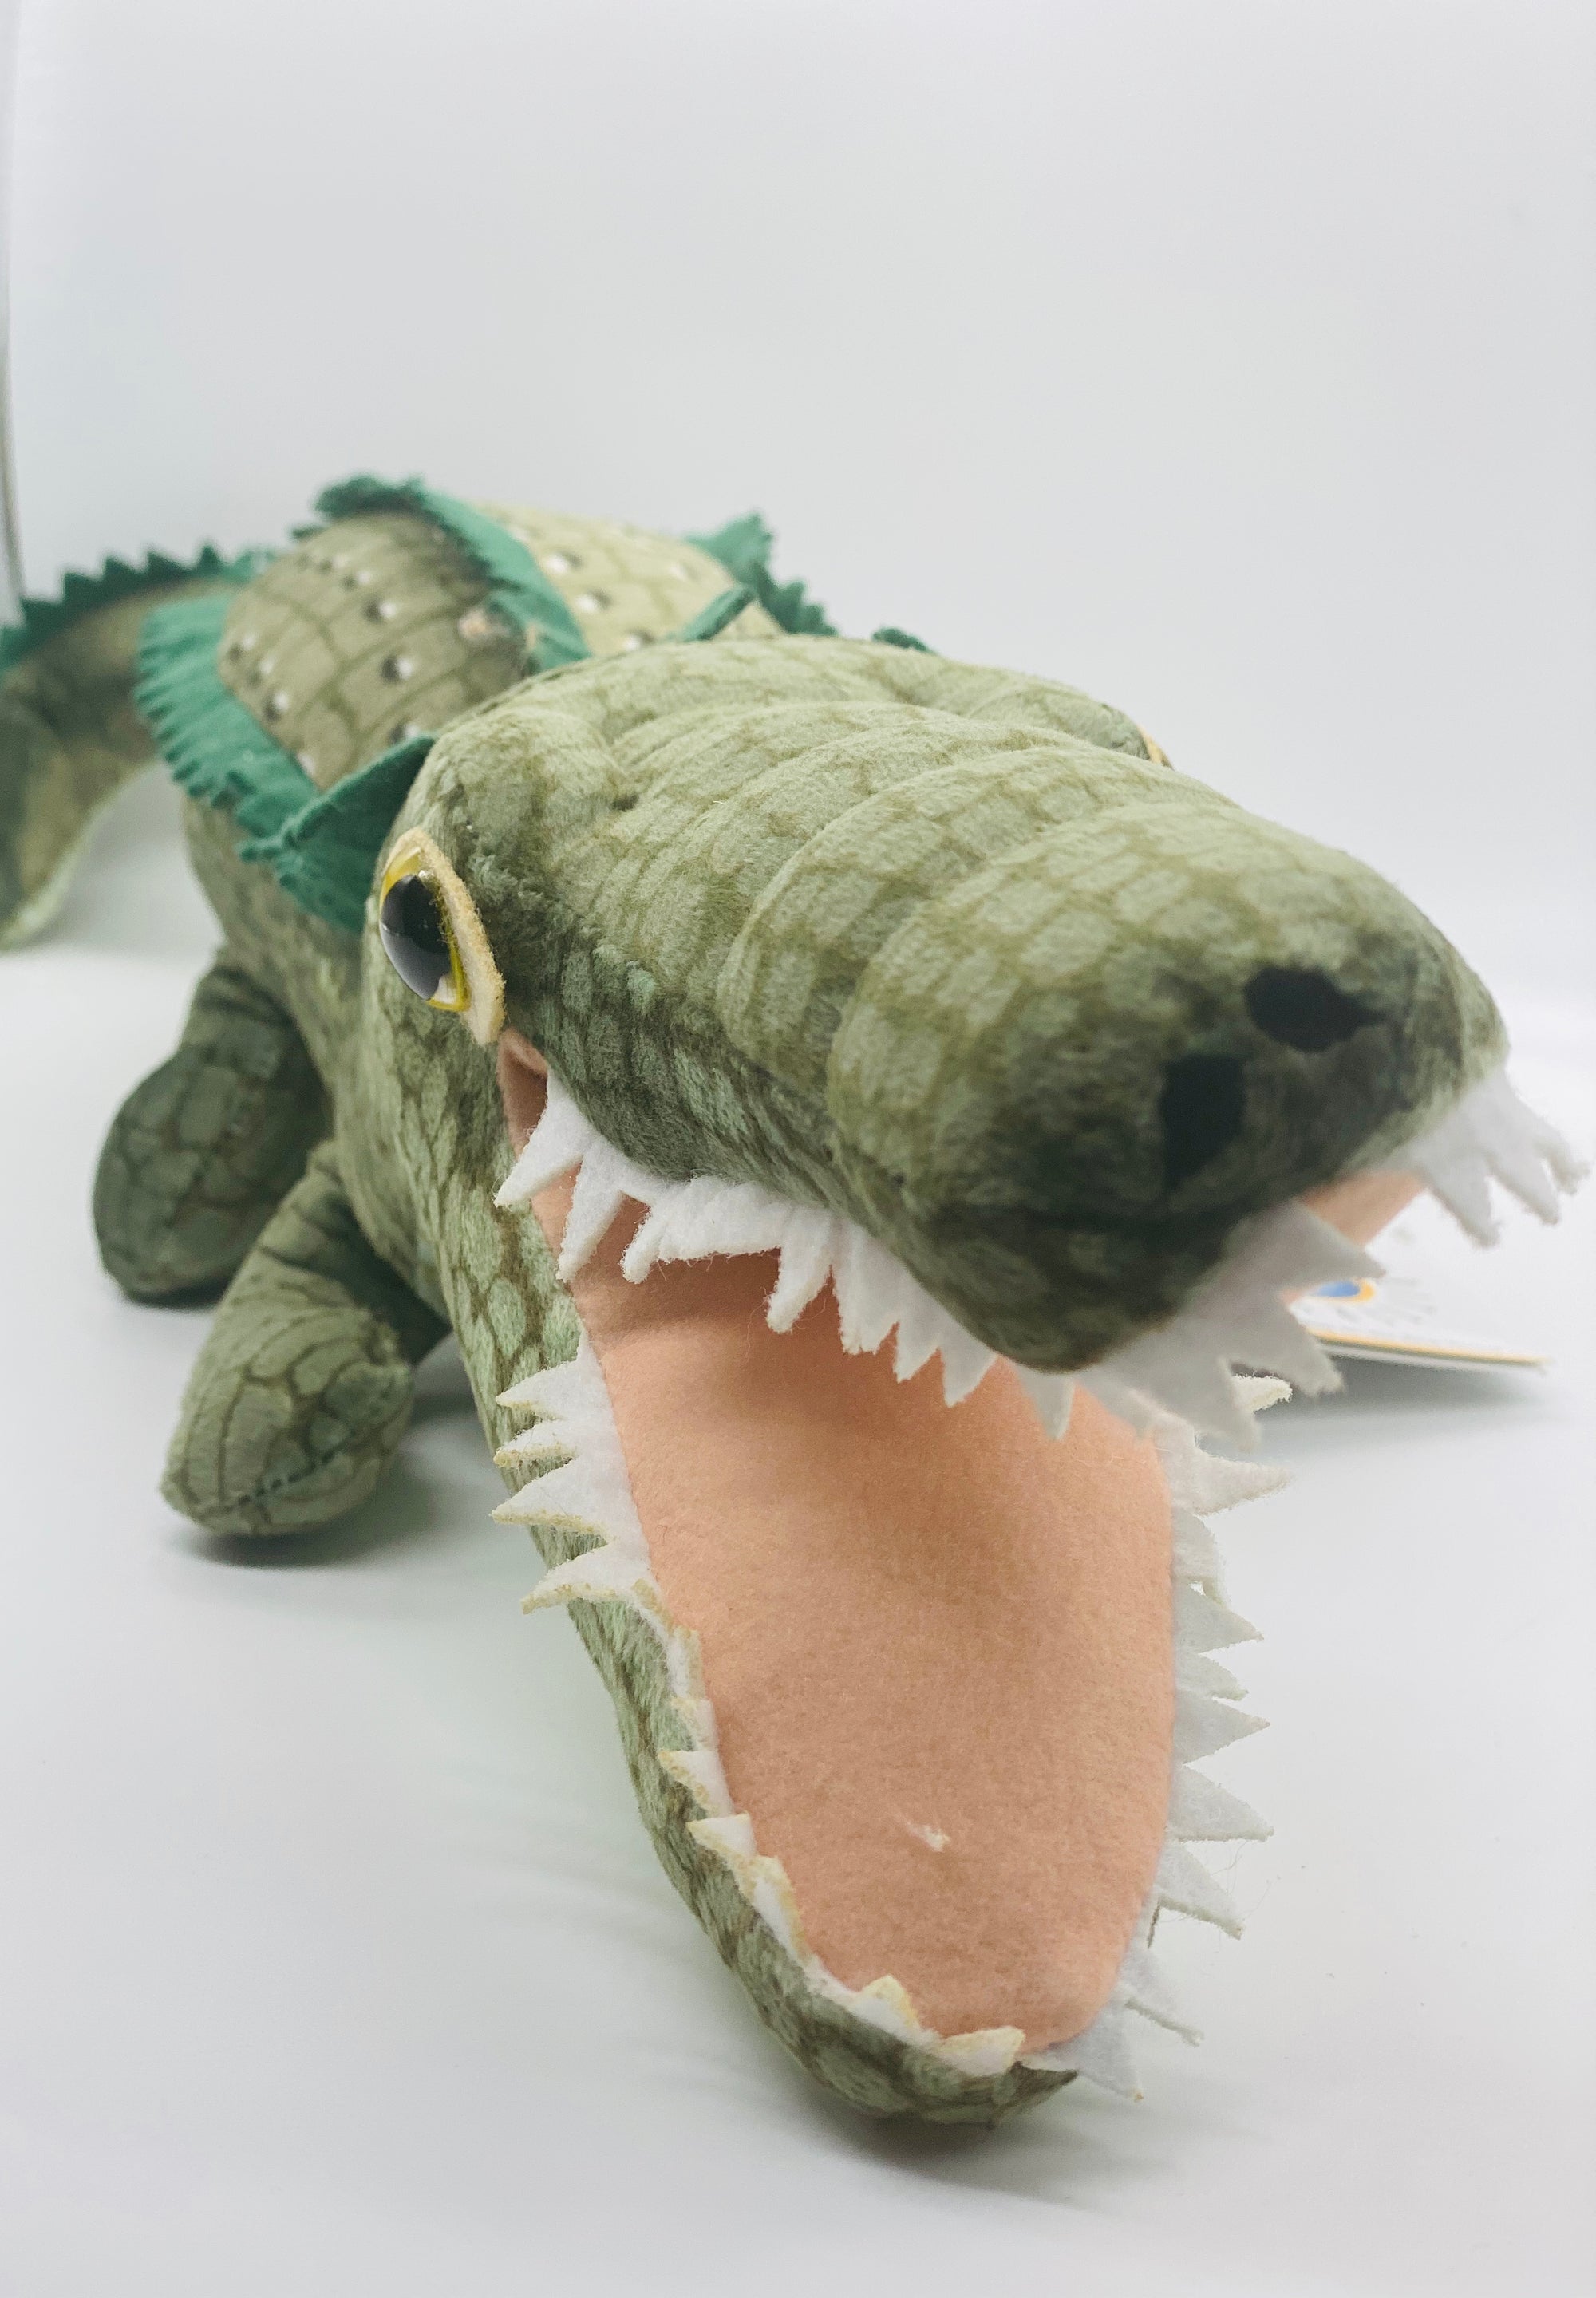 Toothy Plush Alligator Conservation Critter by Wildlife Artists